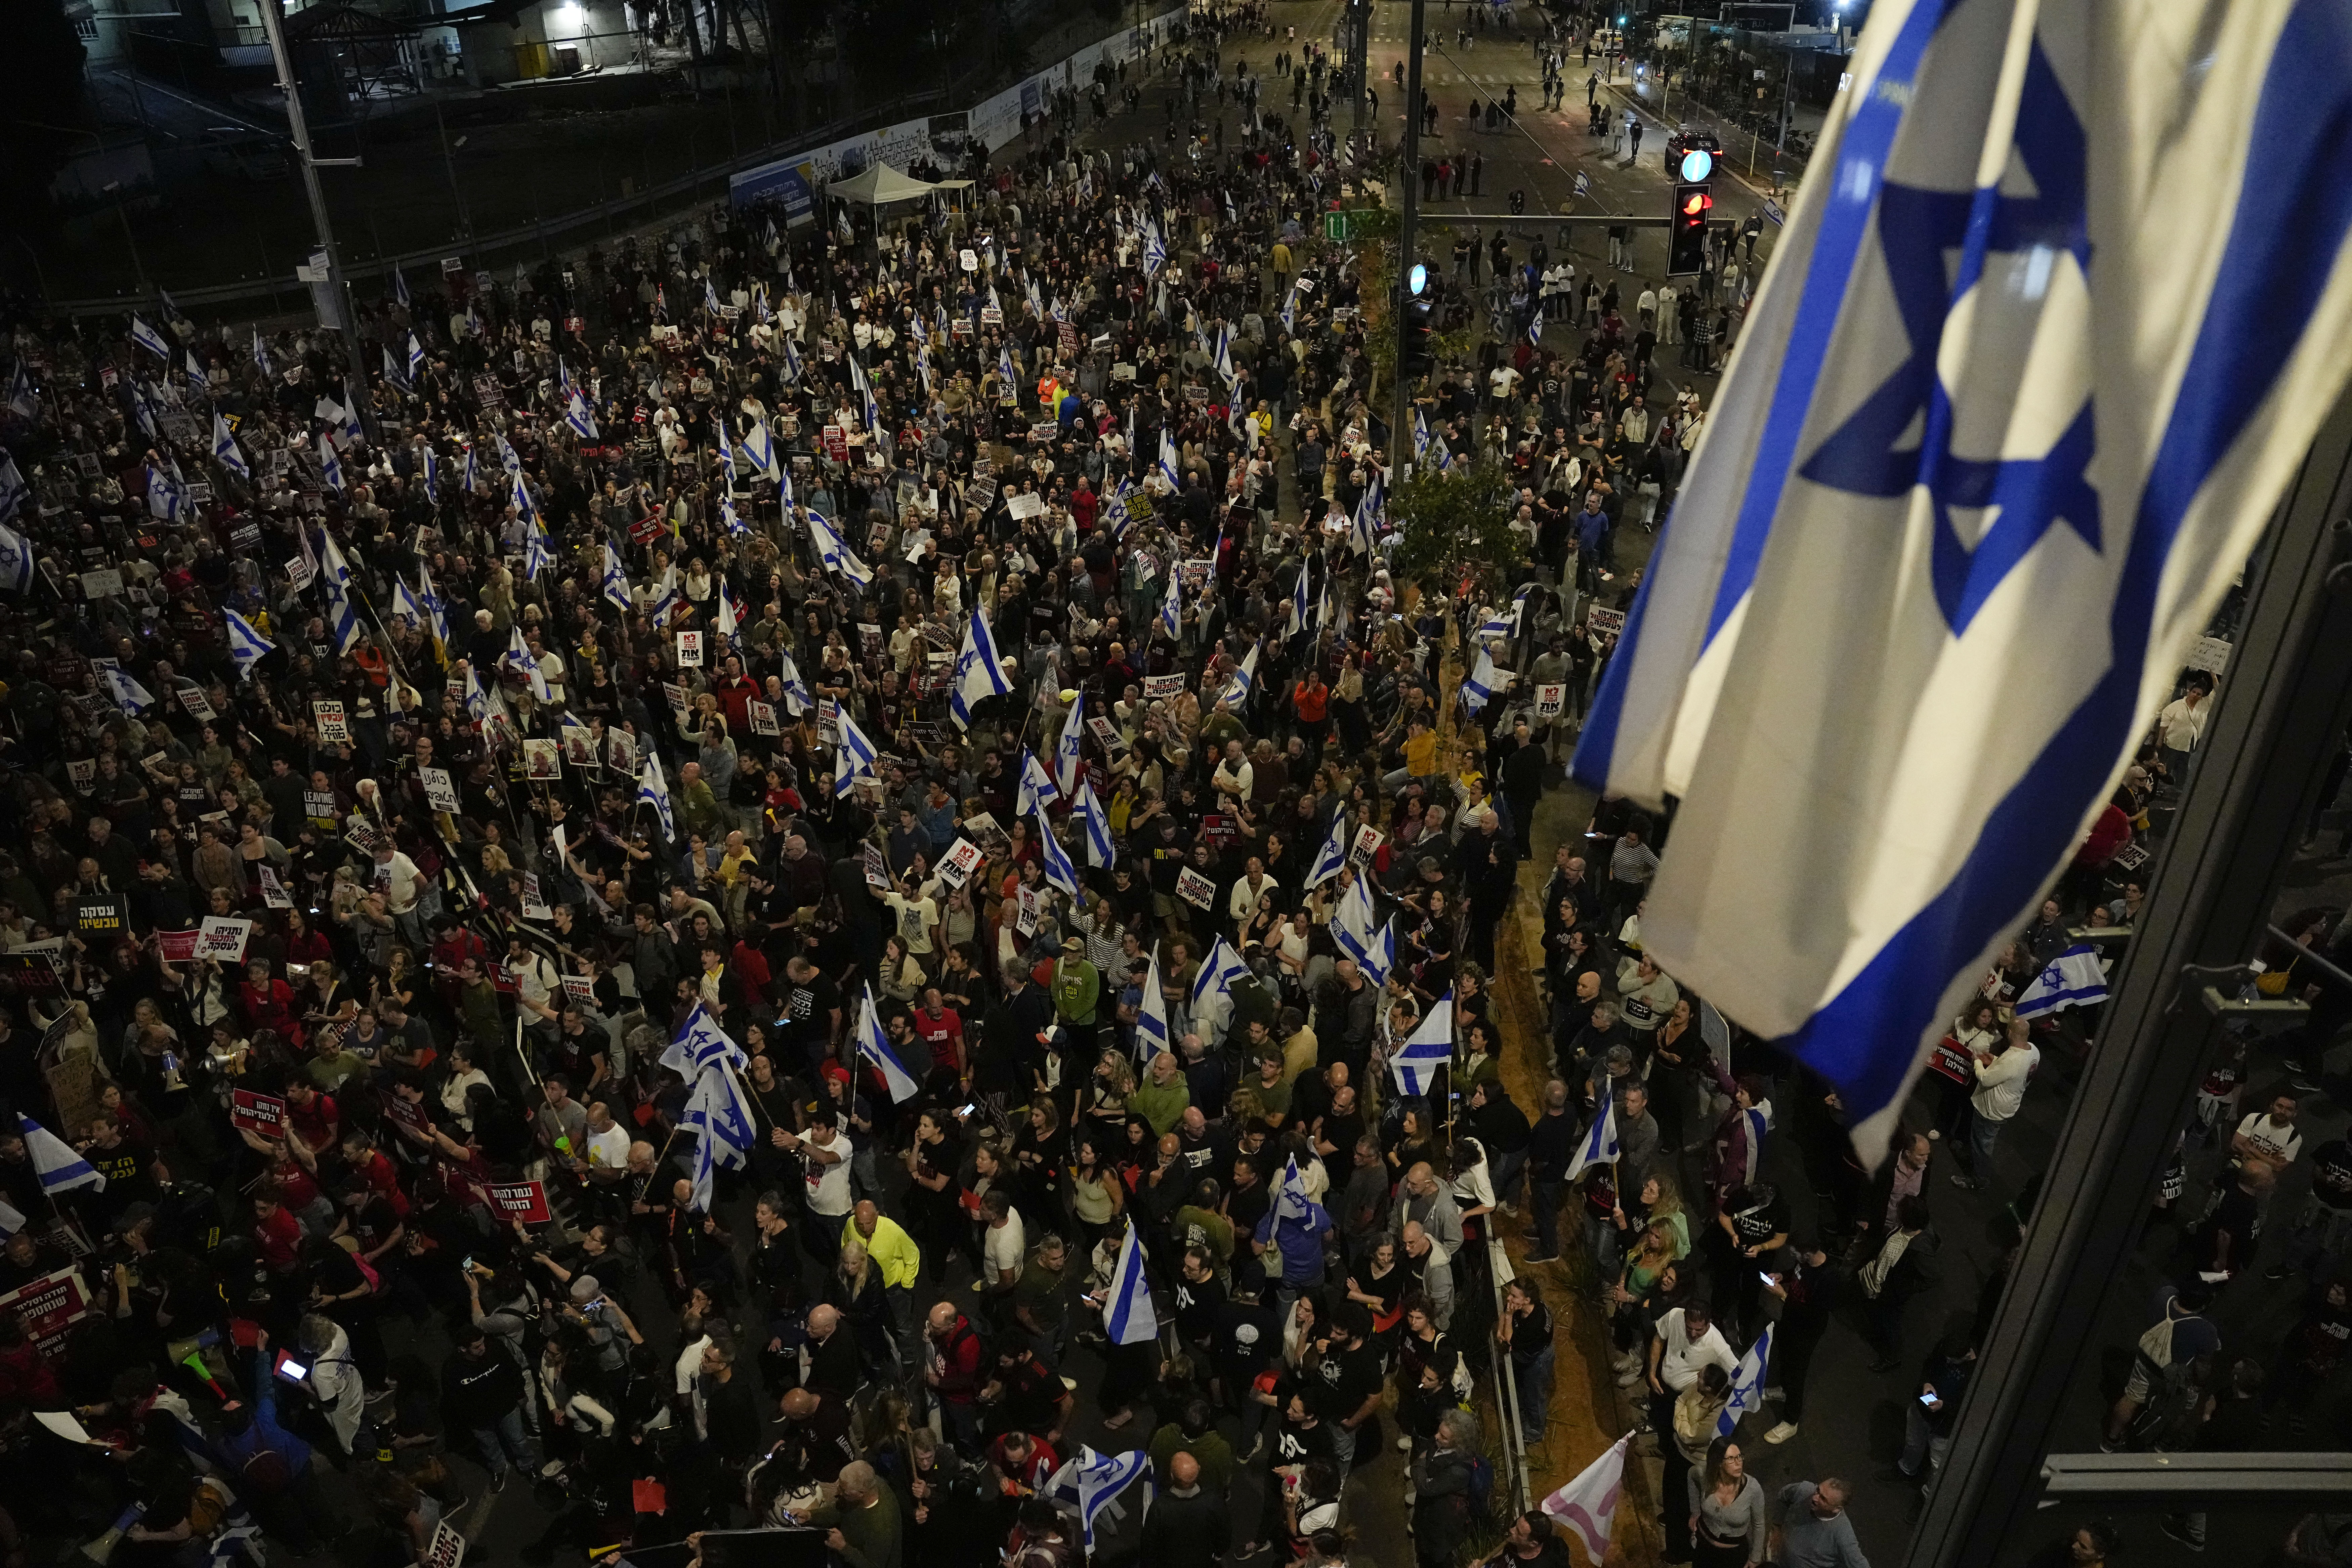 People protest against Israeli Prime Minister Benjamin Netanyahu's government, and call for the release of hostages held in Gaza, in Tel Aviv, Israel, on April 6.